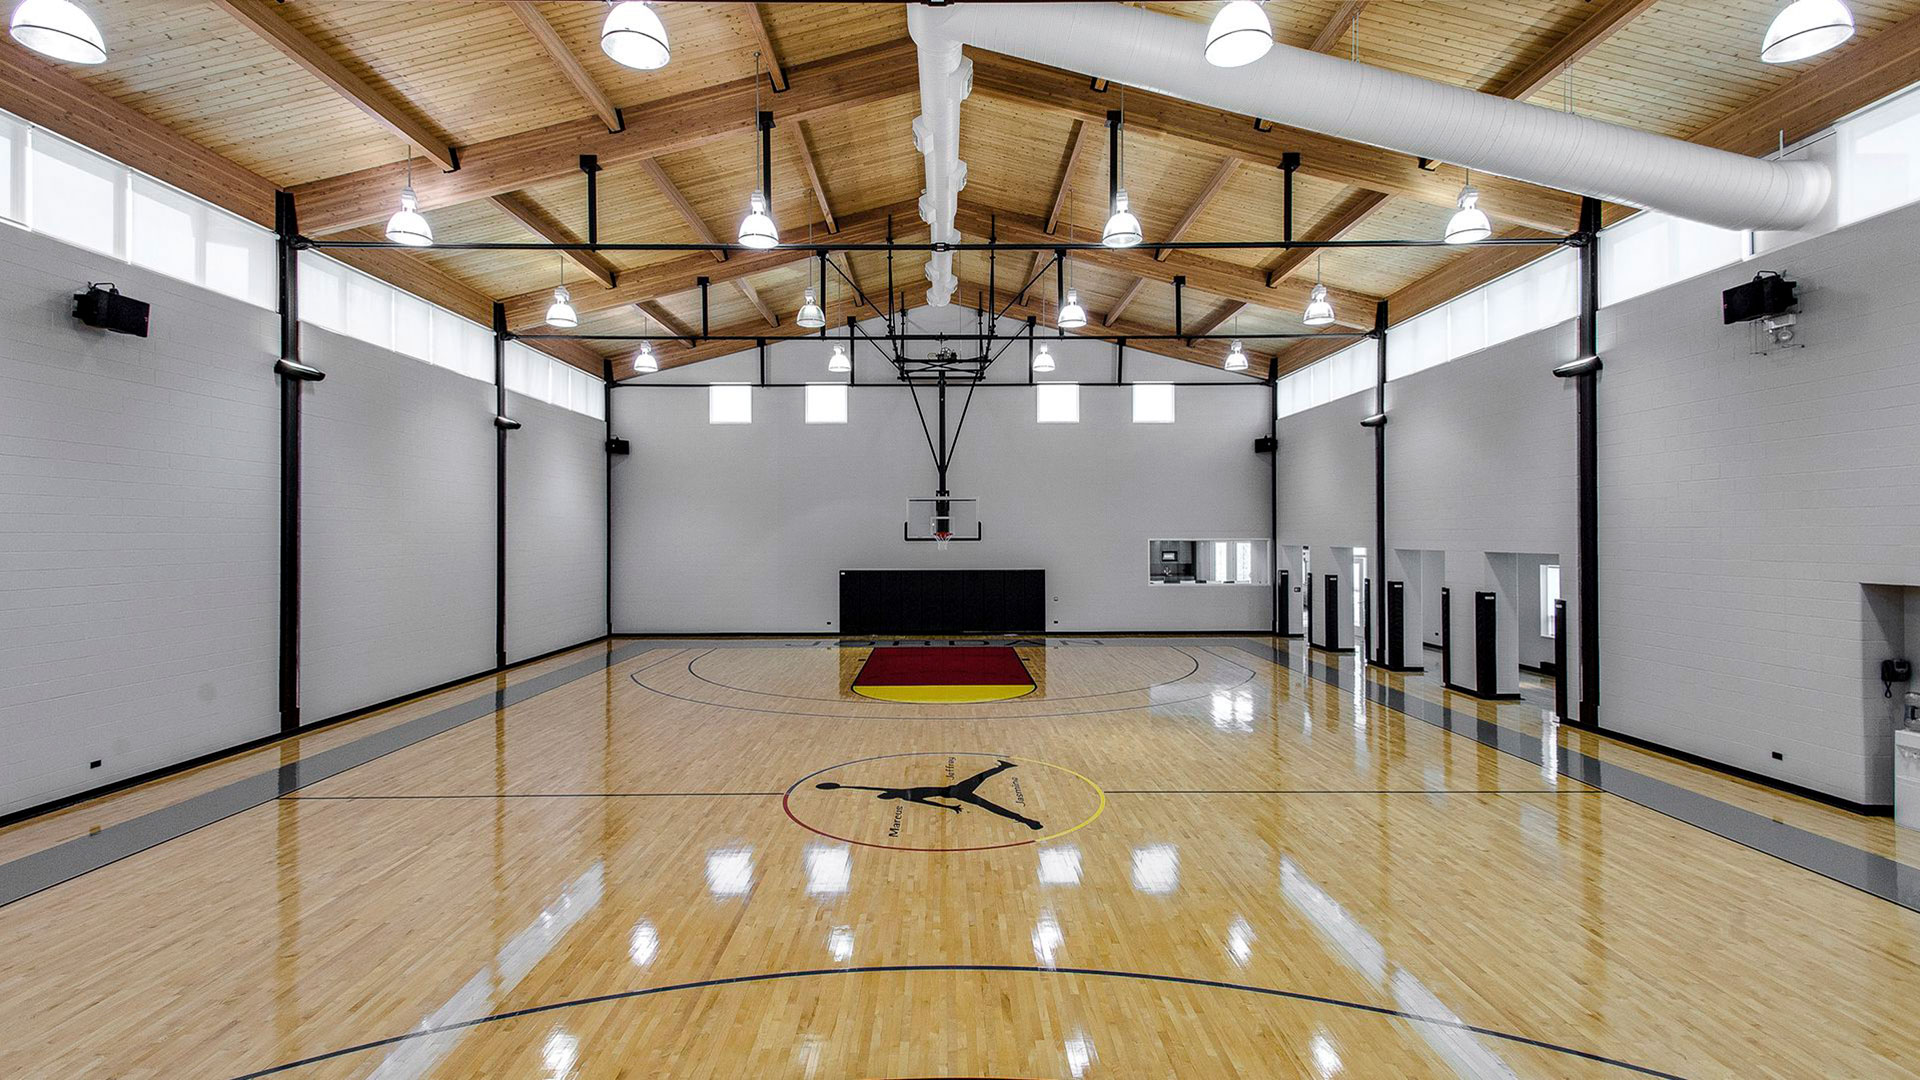 The must-see basketball court (Photo: Concierge Auctions)